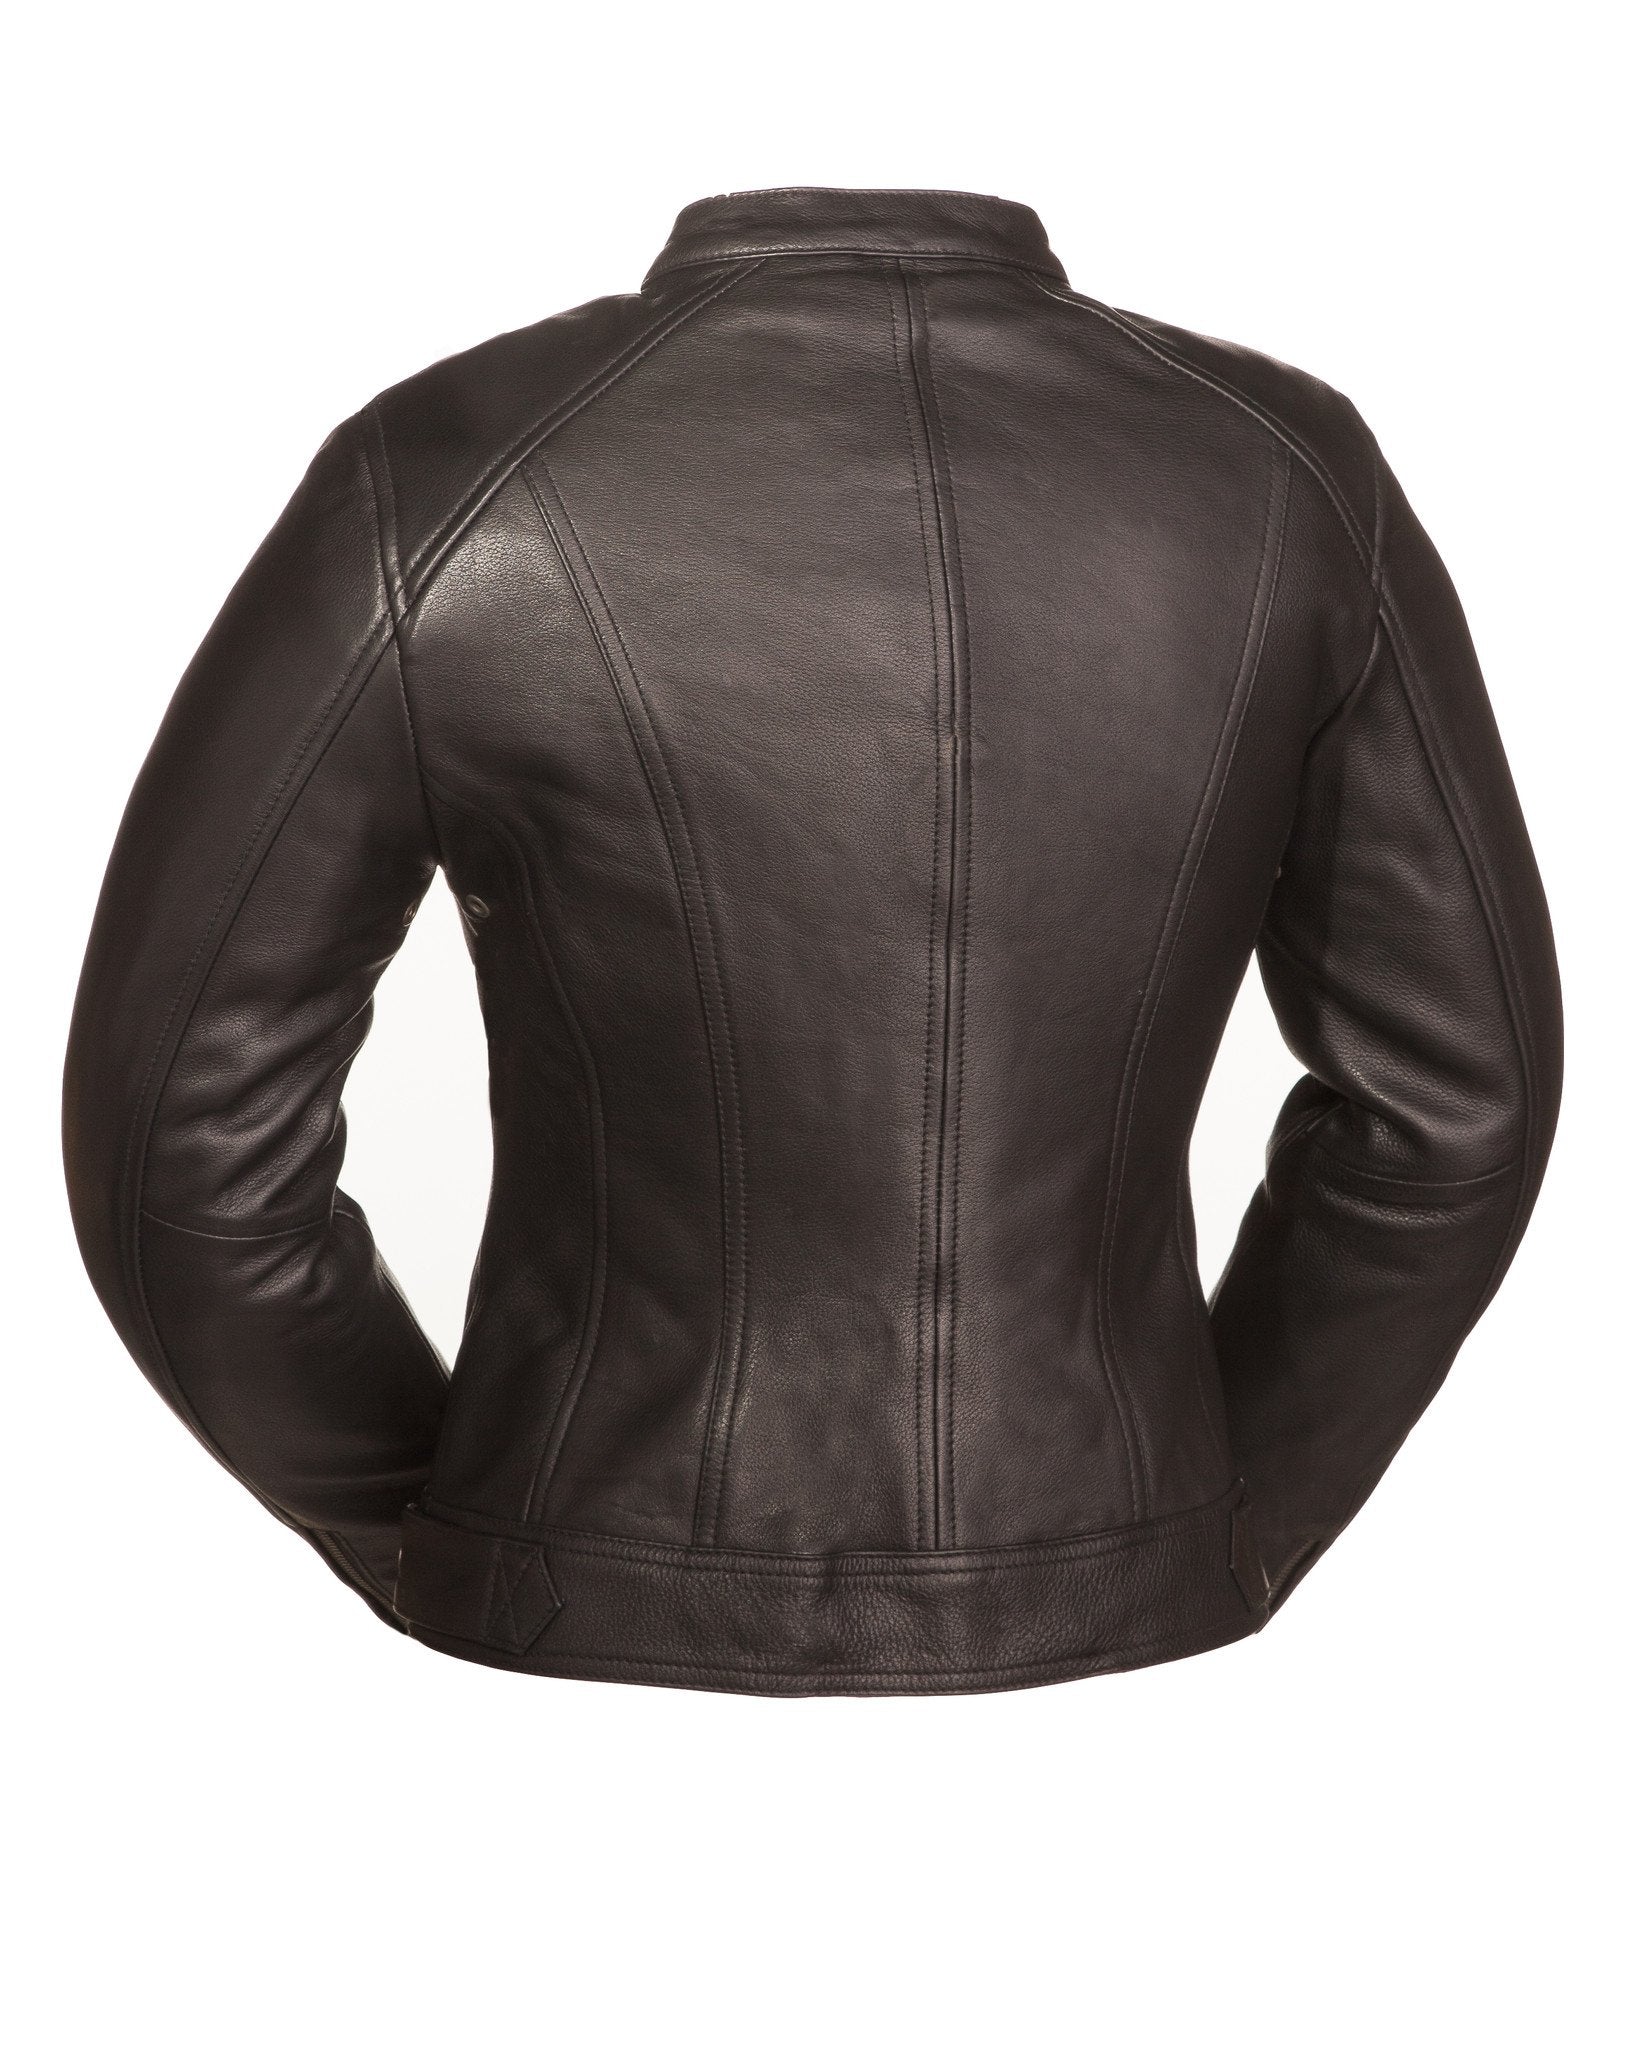 Hot Rider - Ladies Jacket w/ fitted hourglass shape